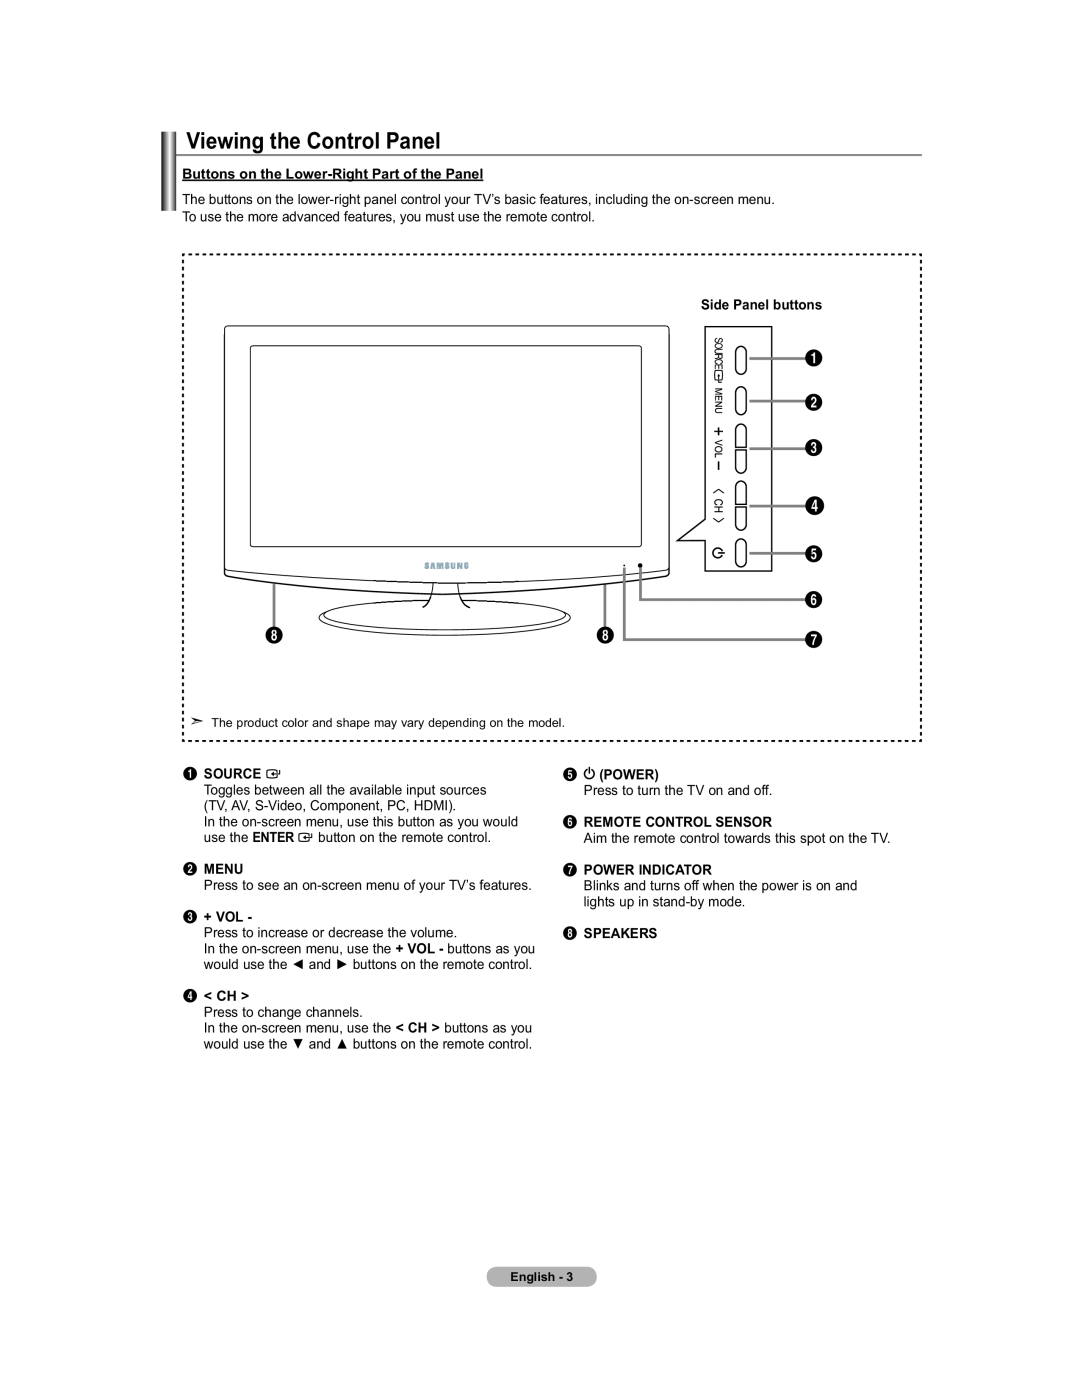 Samsung 451 Buttons on the Lower-Right Part of the Panel, Side Panel buttons, Source, Power, Remote Control Sensor, Menu 